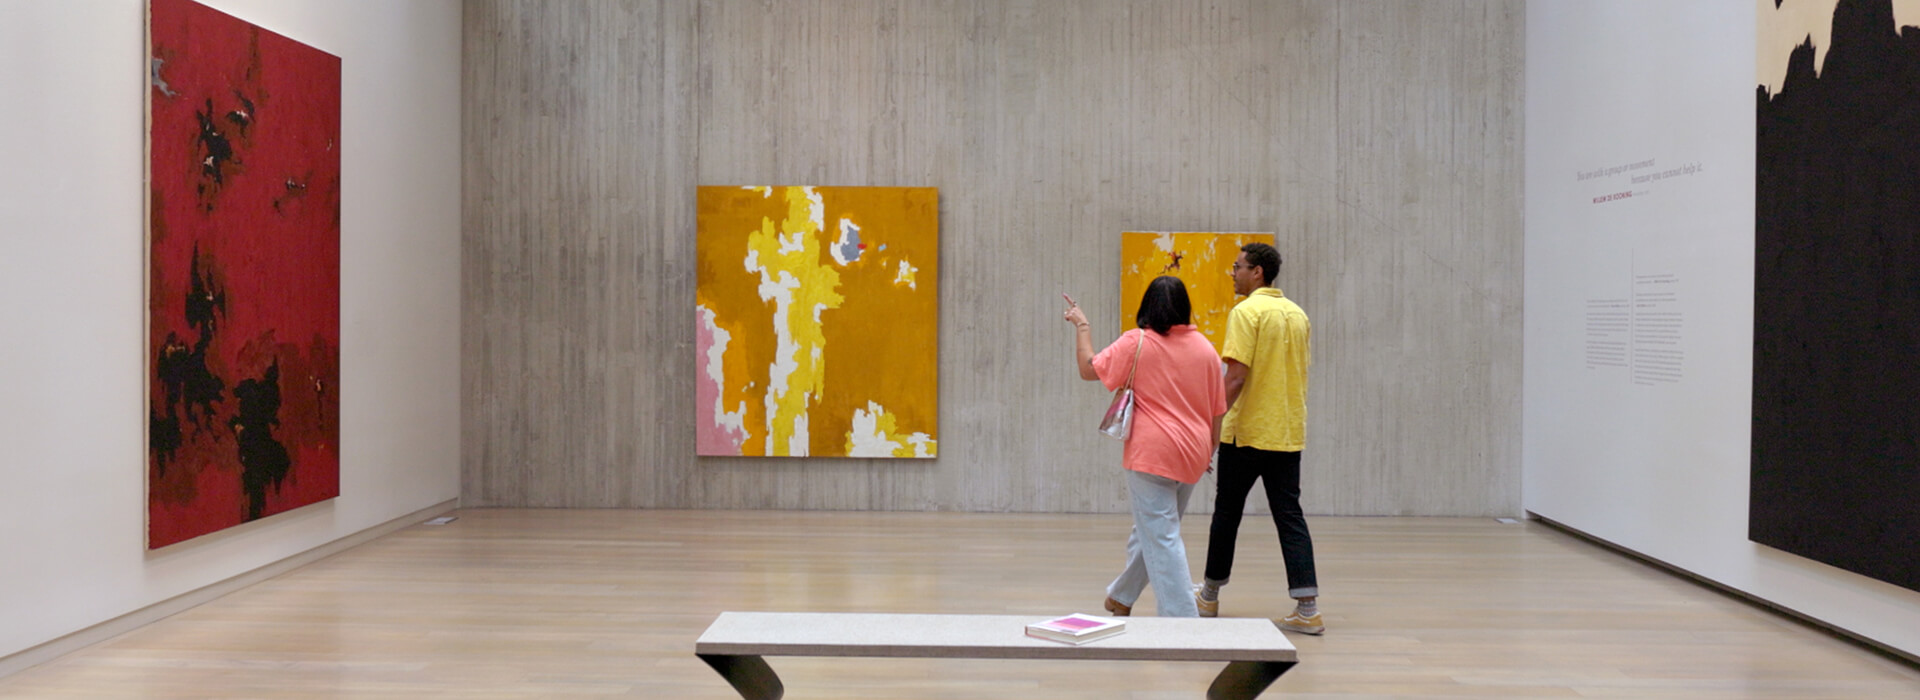 A couple wearing yellow and pink shirts walks towards a yellow and pink painting